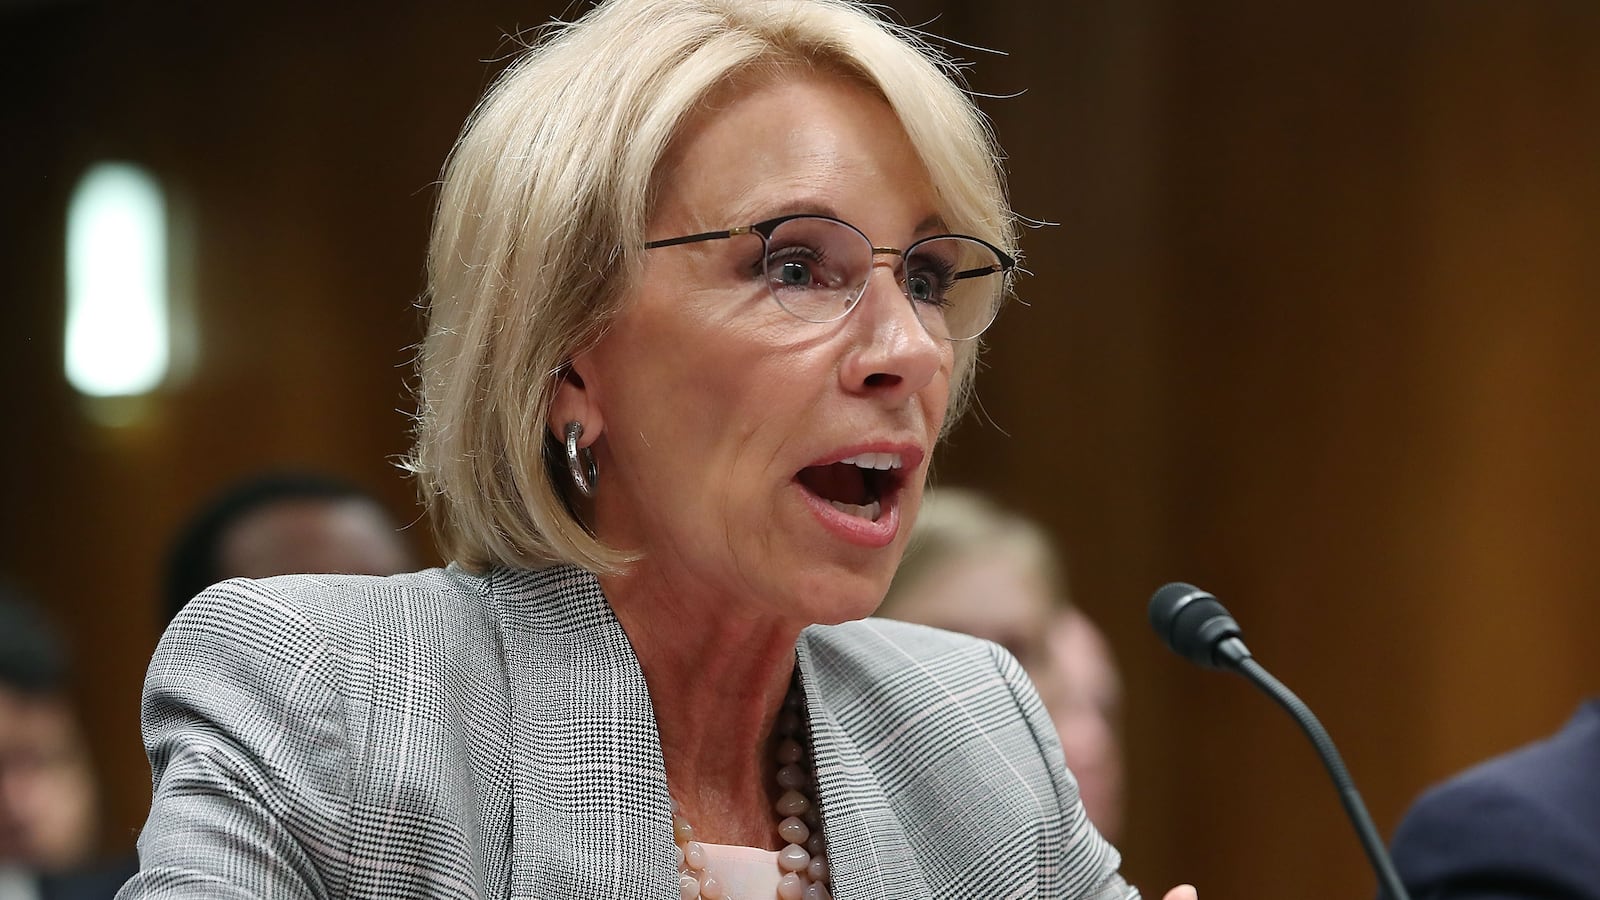 Education Secretary Betsy DeVos testifies during a Senate Appropriations Subcommittee hearing on Capitol Hill, June 5, 2018 in Washington, DC. (Photo by Mark Wilson/Getty Images)